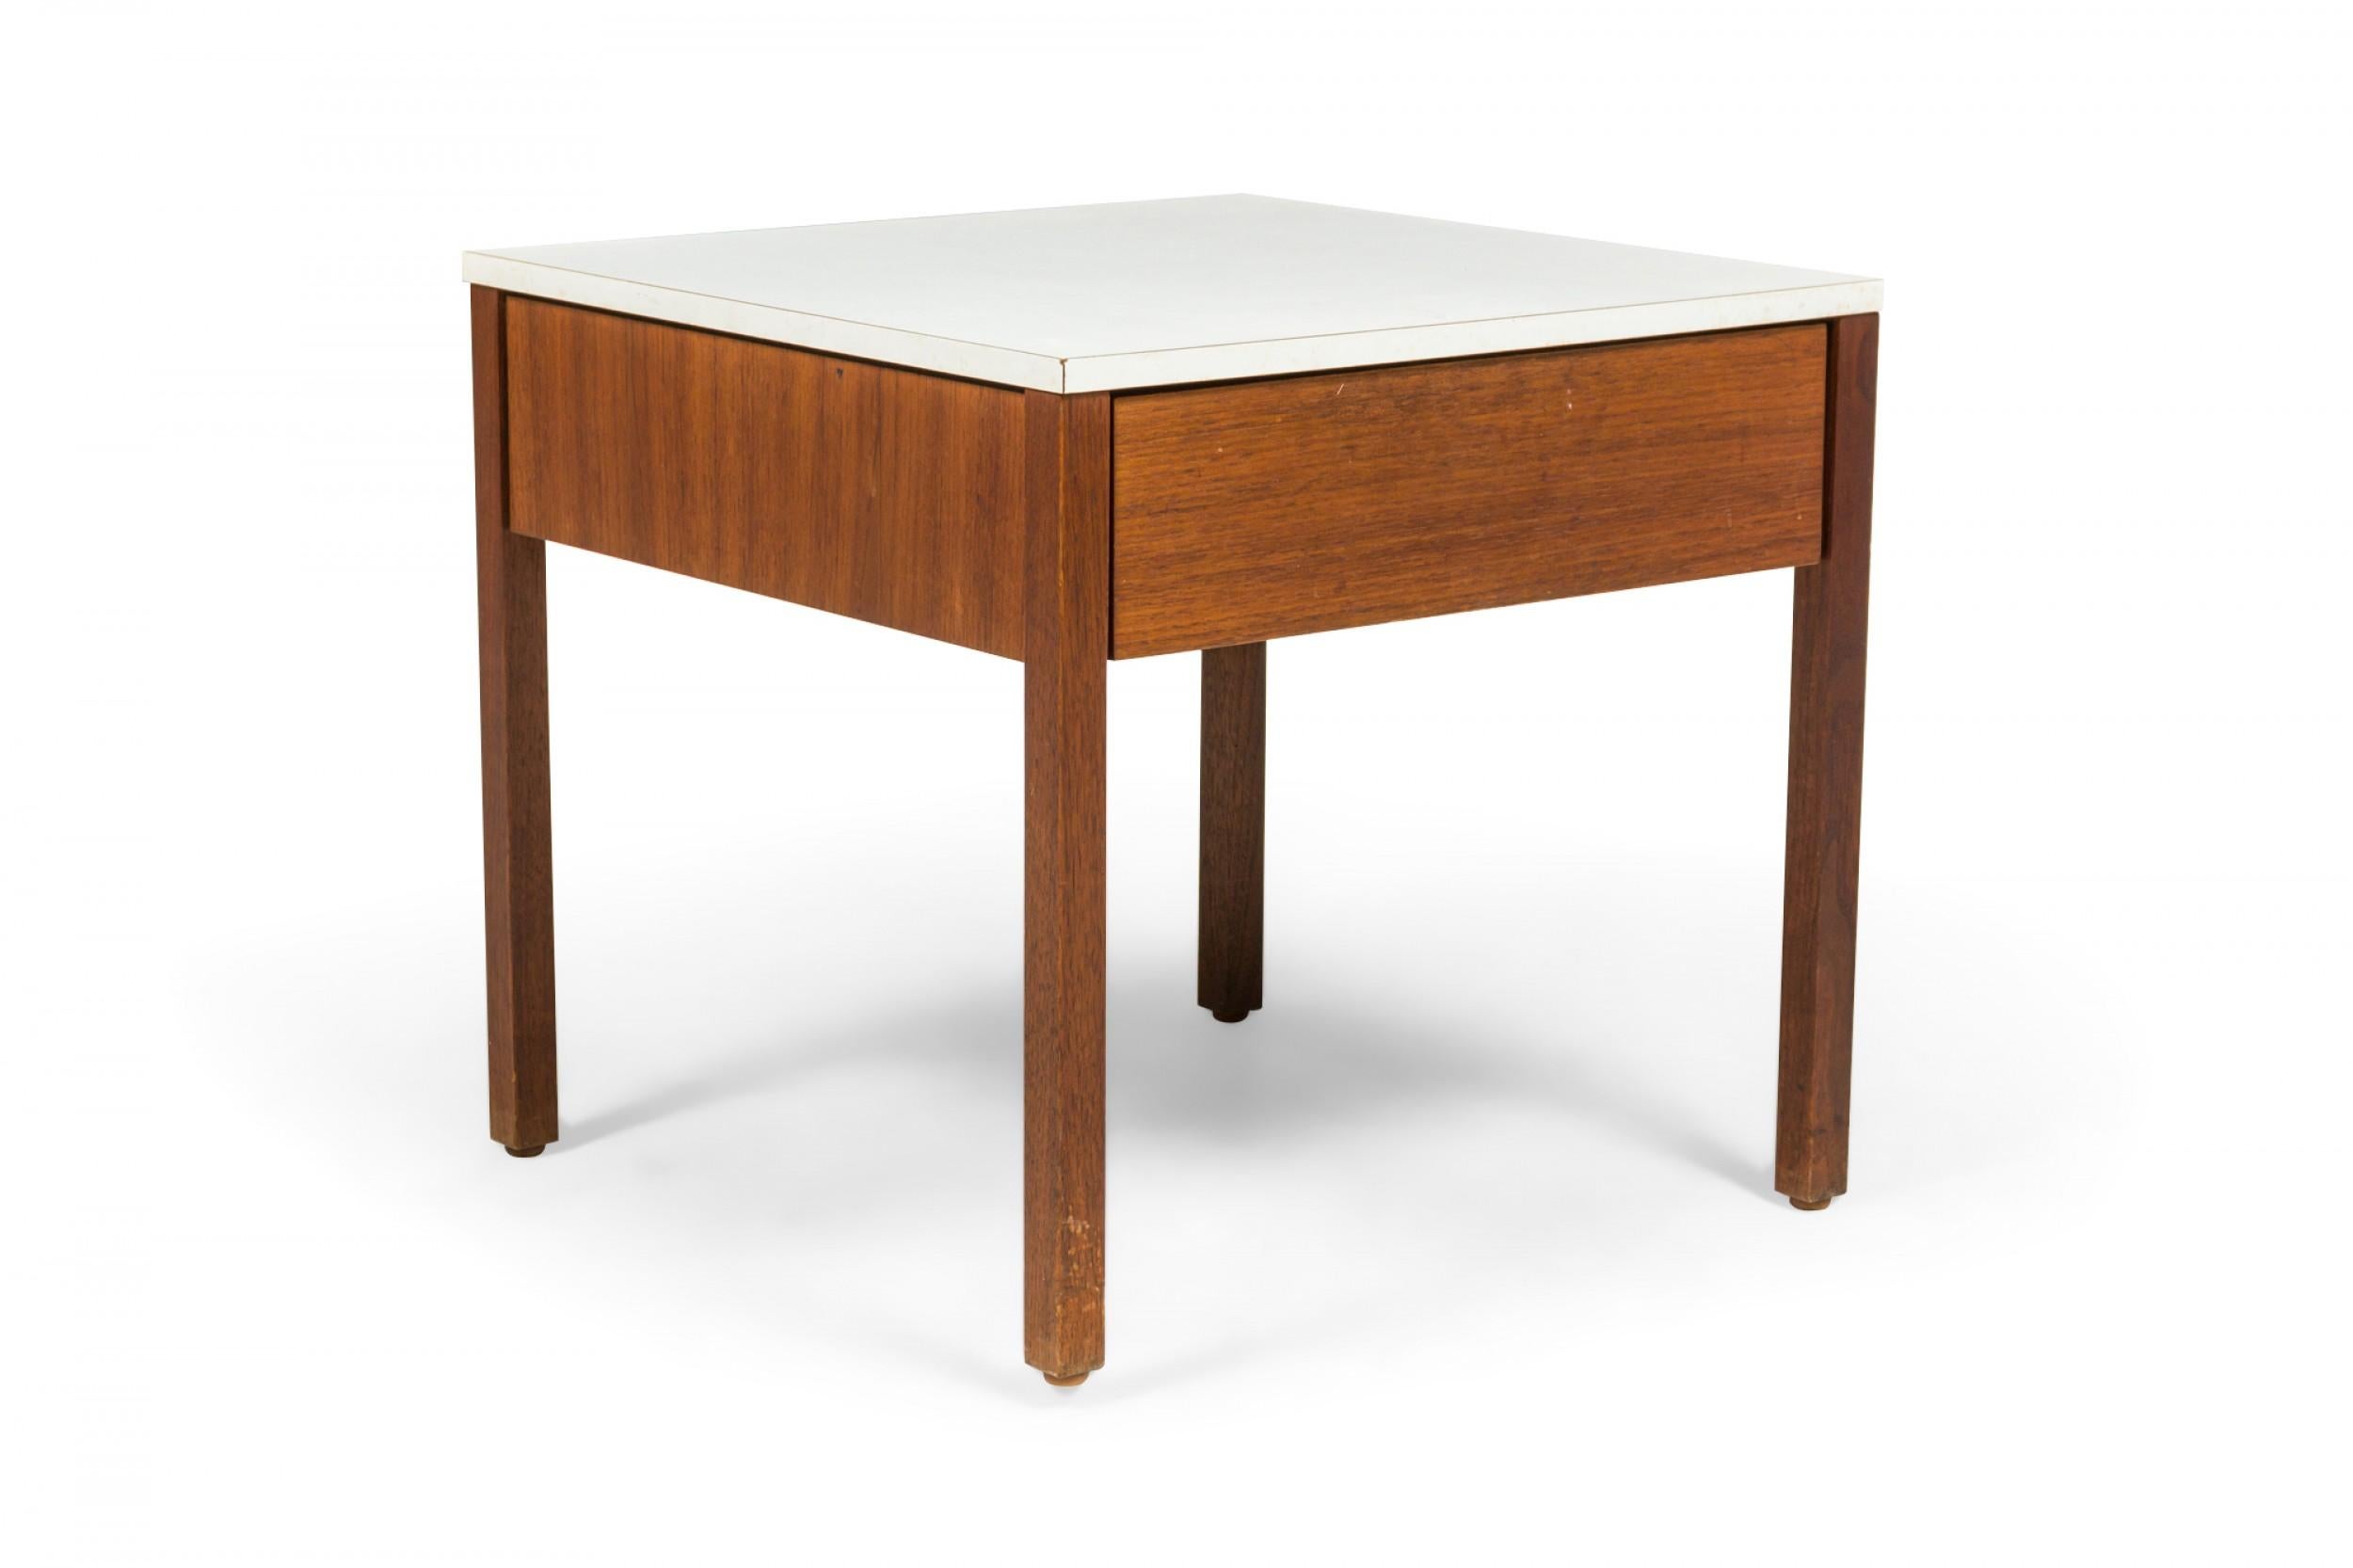 Pair of American mid-century square nightstands / end tables with white laminate tops above a walnut base with a single drawer, resting on four square walnut legs. (FLORENCE KNOLL FOR KNOLL INTERNATIONAL)(PRICED AS PAIR)